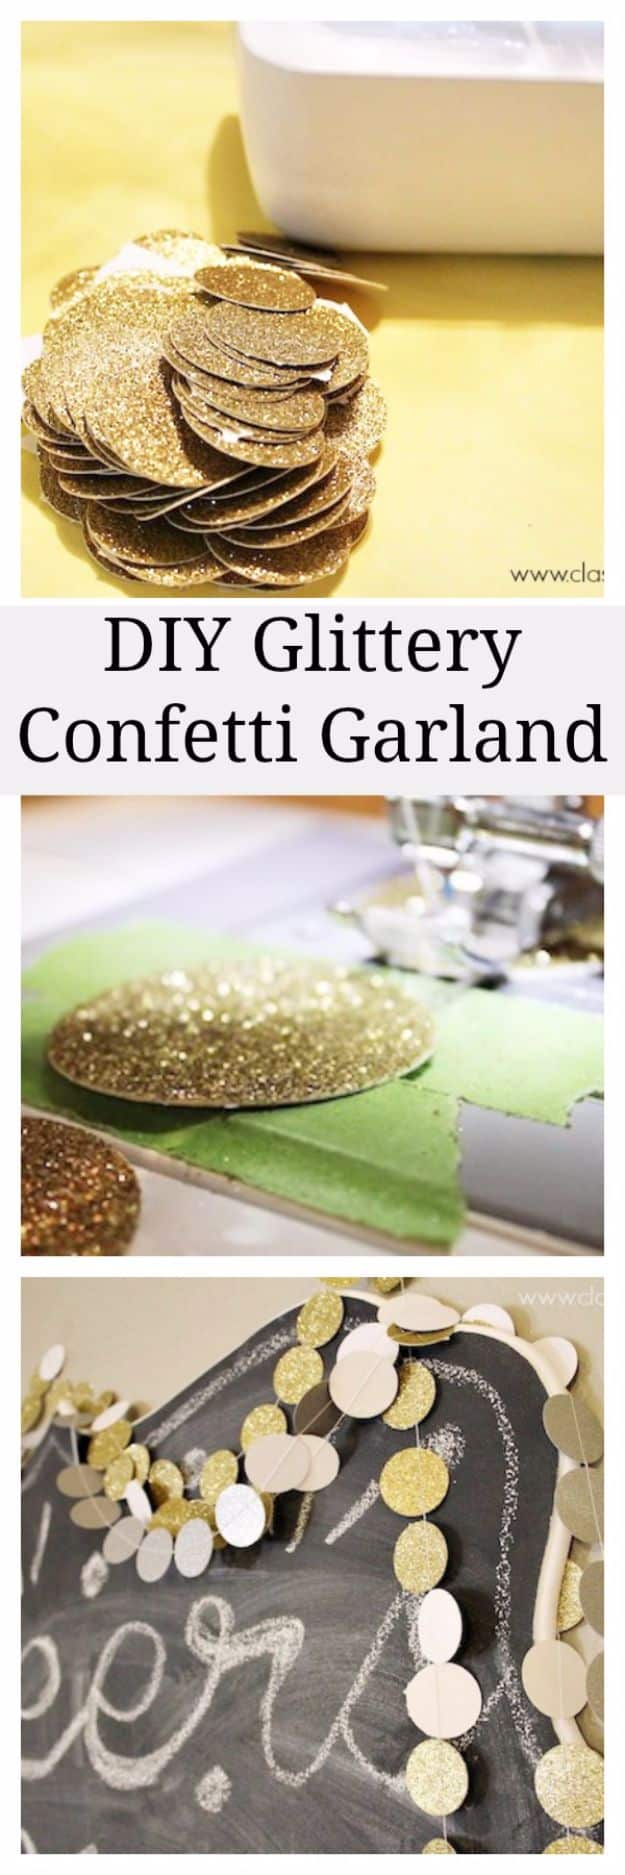 New Years Eve Decor Ideas - DIY Glittery Confetti Garland - DIY New Year's Eve Decorations - Cheap Ideas for Banners, Balloons, Party Tables, Centerpieces and Festive Streamers and Lights - Cool Placecards, Photo Backdrops, Party Hats, Party Horns and Champagne Glasses - Cute Invitations, Games and Free Printables #diy #newyearseve #parties